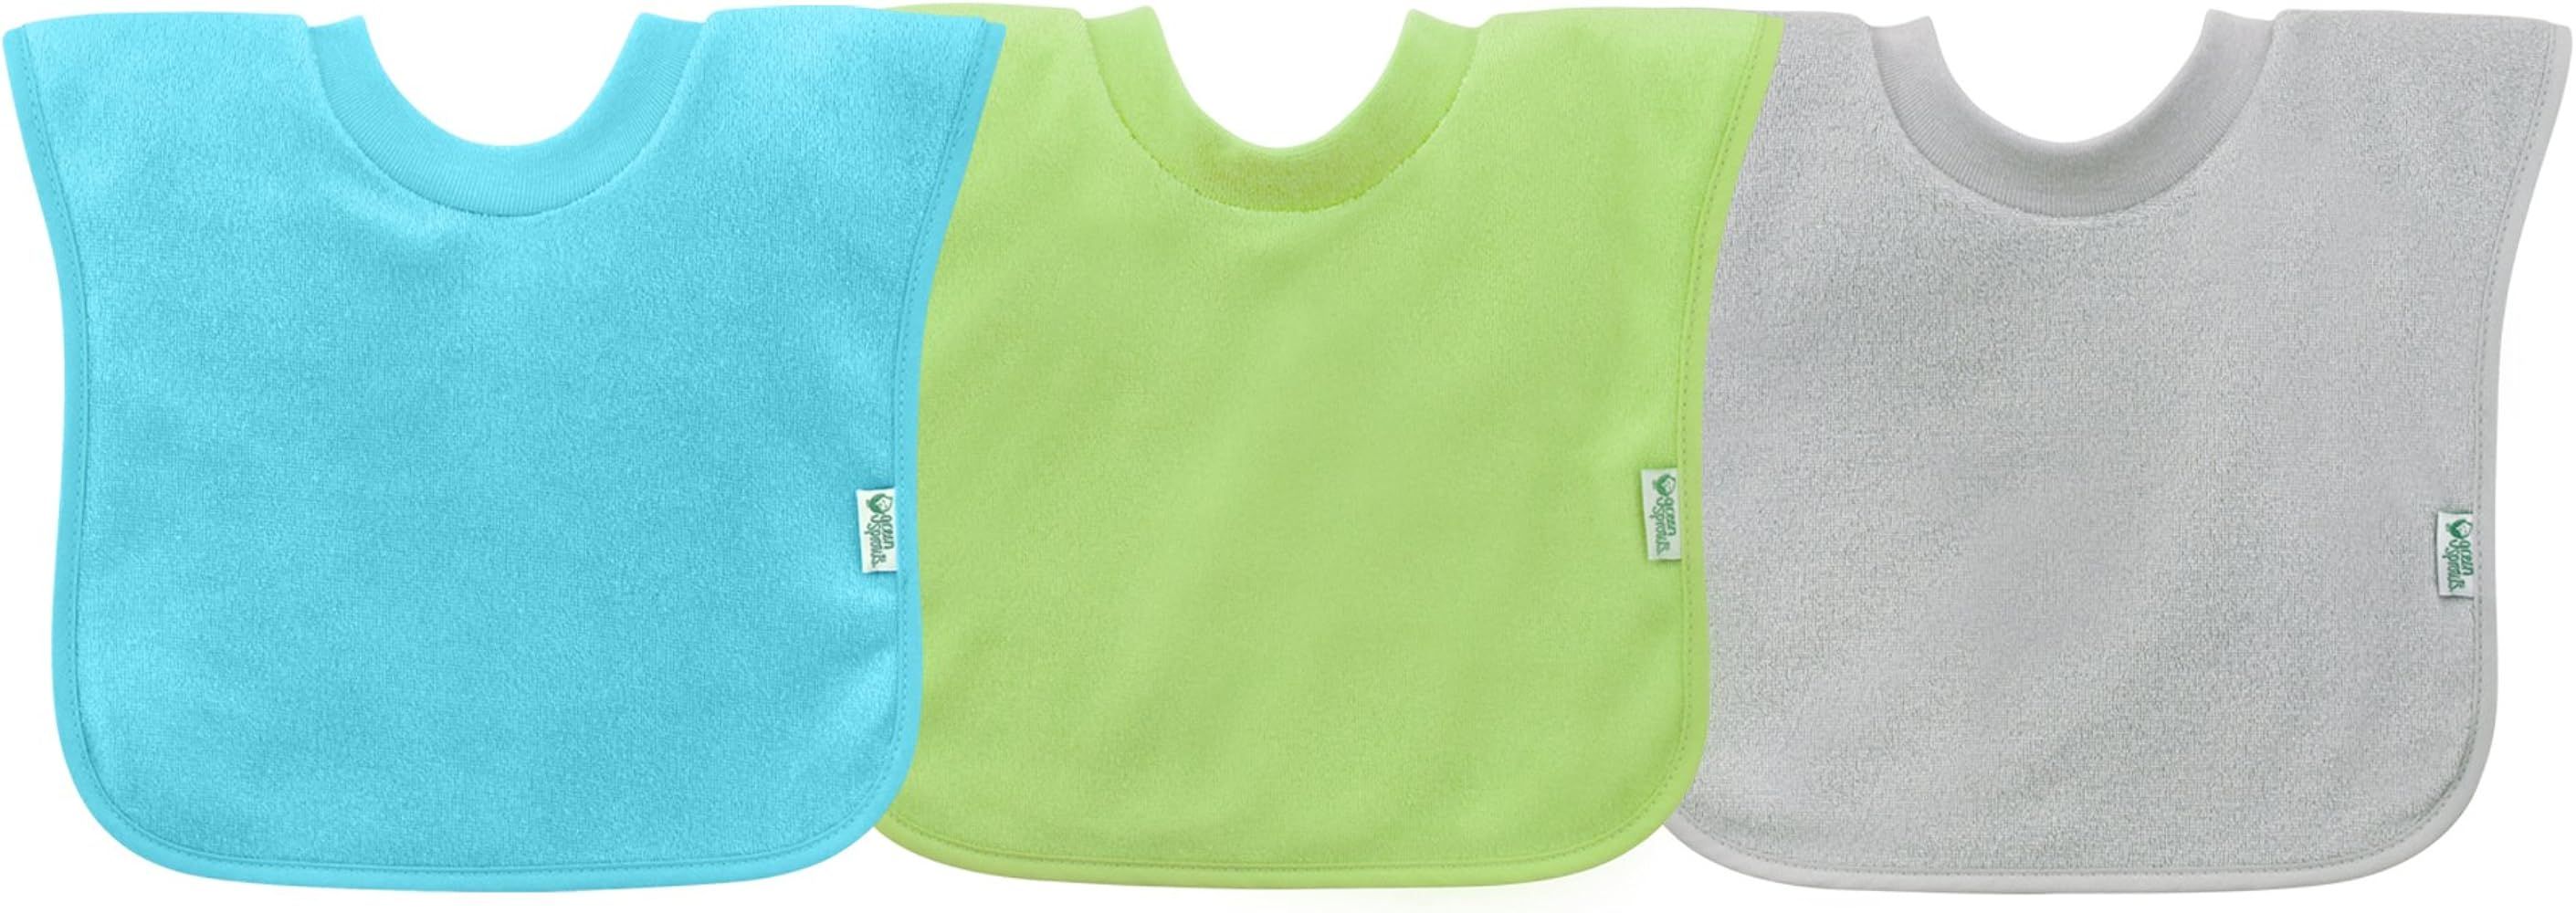 green sprouts Stay-dry Pull-over Bibs | Amazon (US)